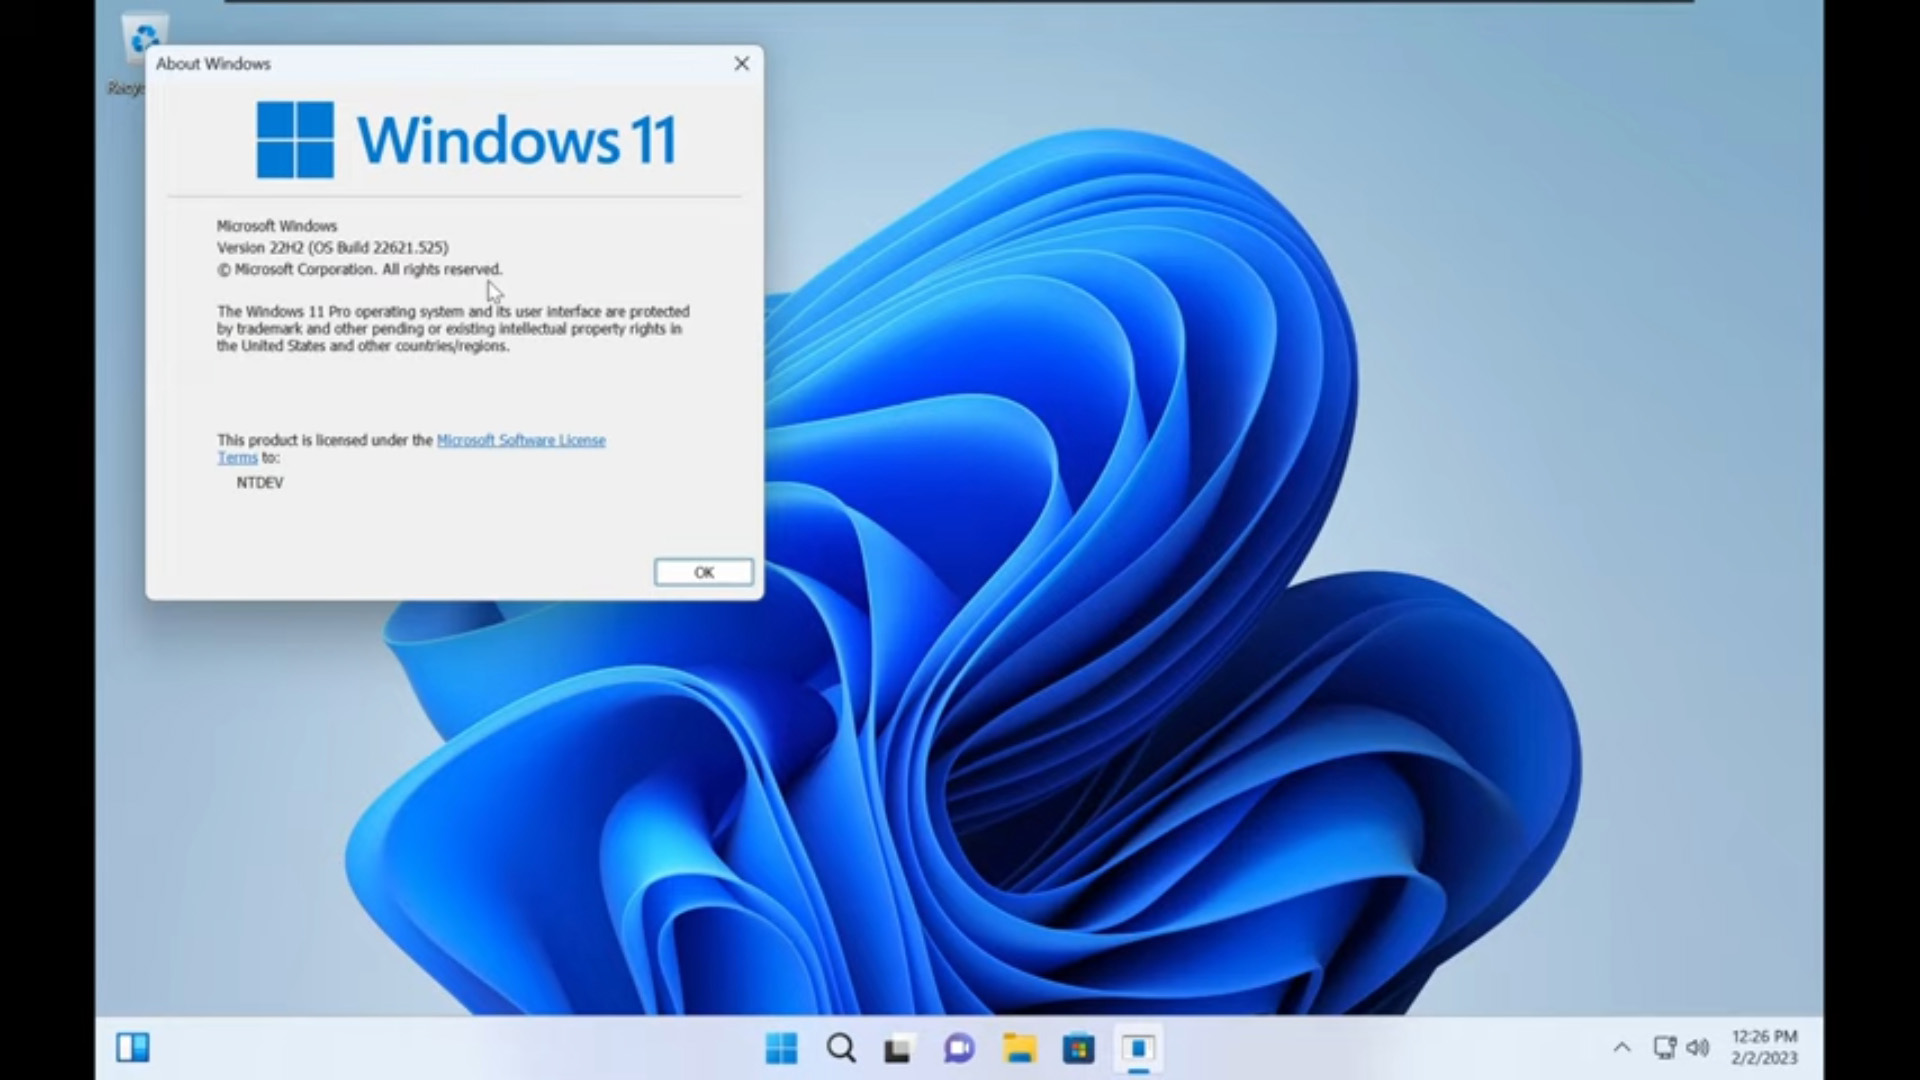 Windows Tiny11: Your Solution to Incompatible Systems with Windows 11